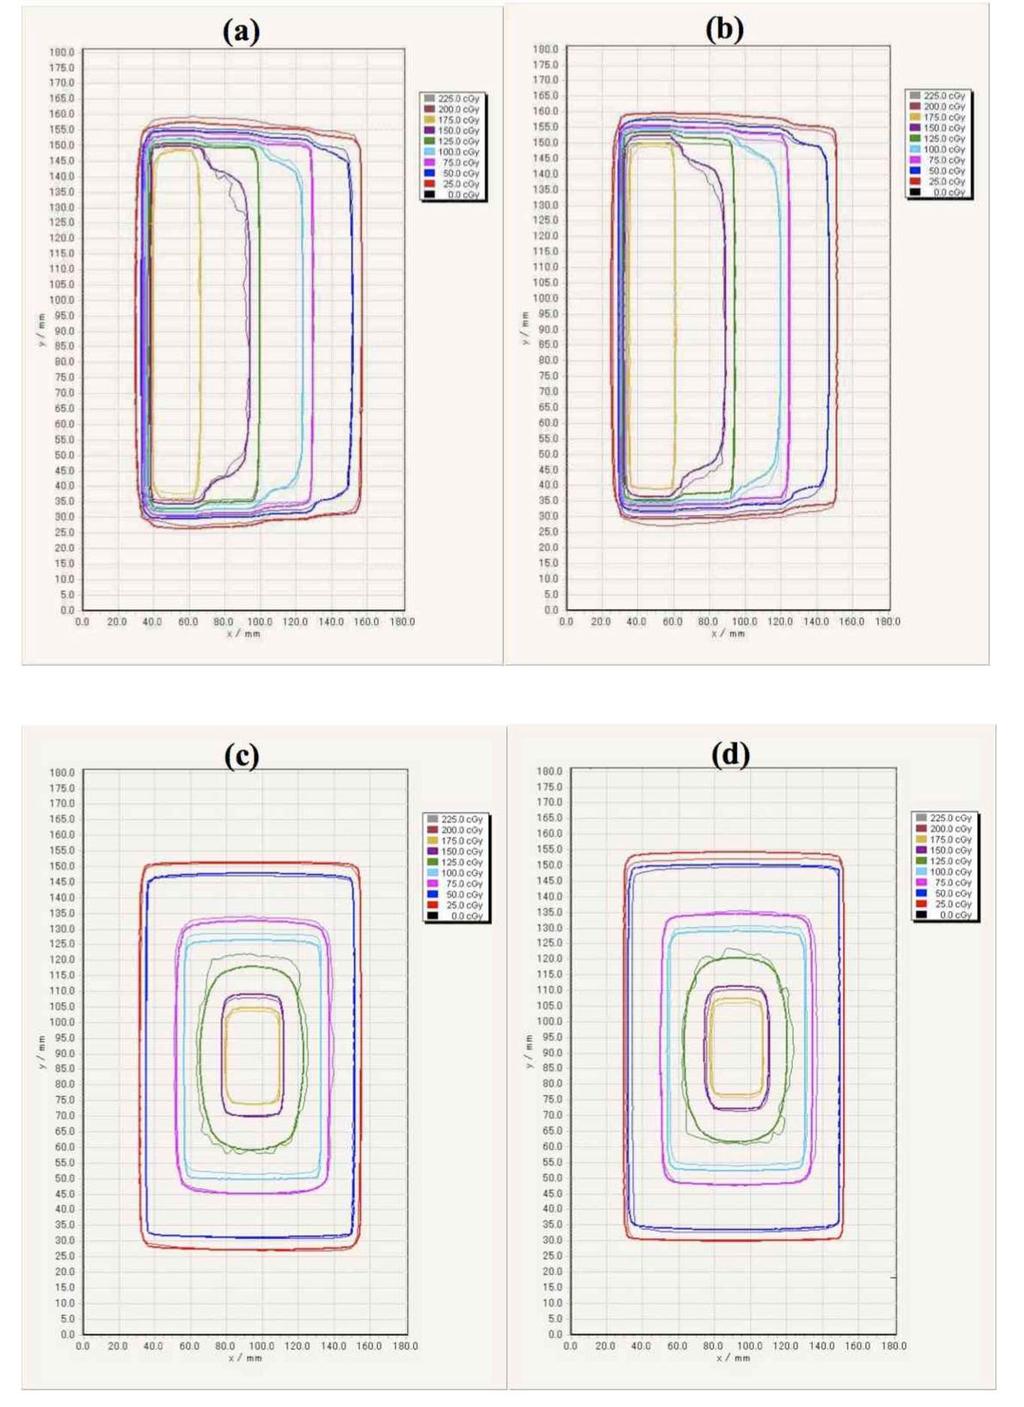 418 Shimohigashi et al.: Evaluation of a single-scan protocol 418 Fig. 4. Comparison of 2D dose distributions with the step and pyramid pattern for the single-scan protocol, 24-hr protocol, and Eclipse-TPS.